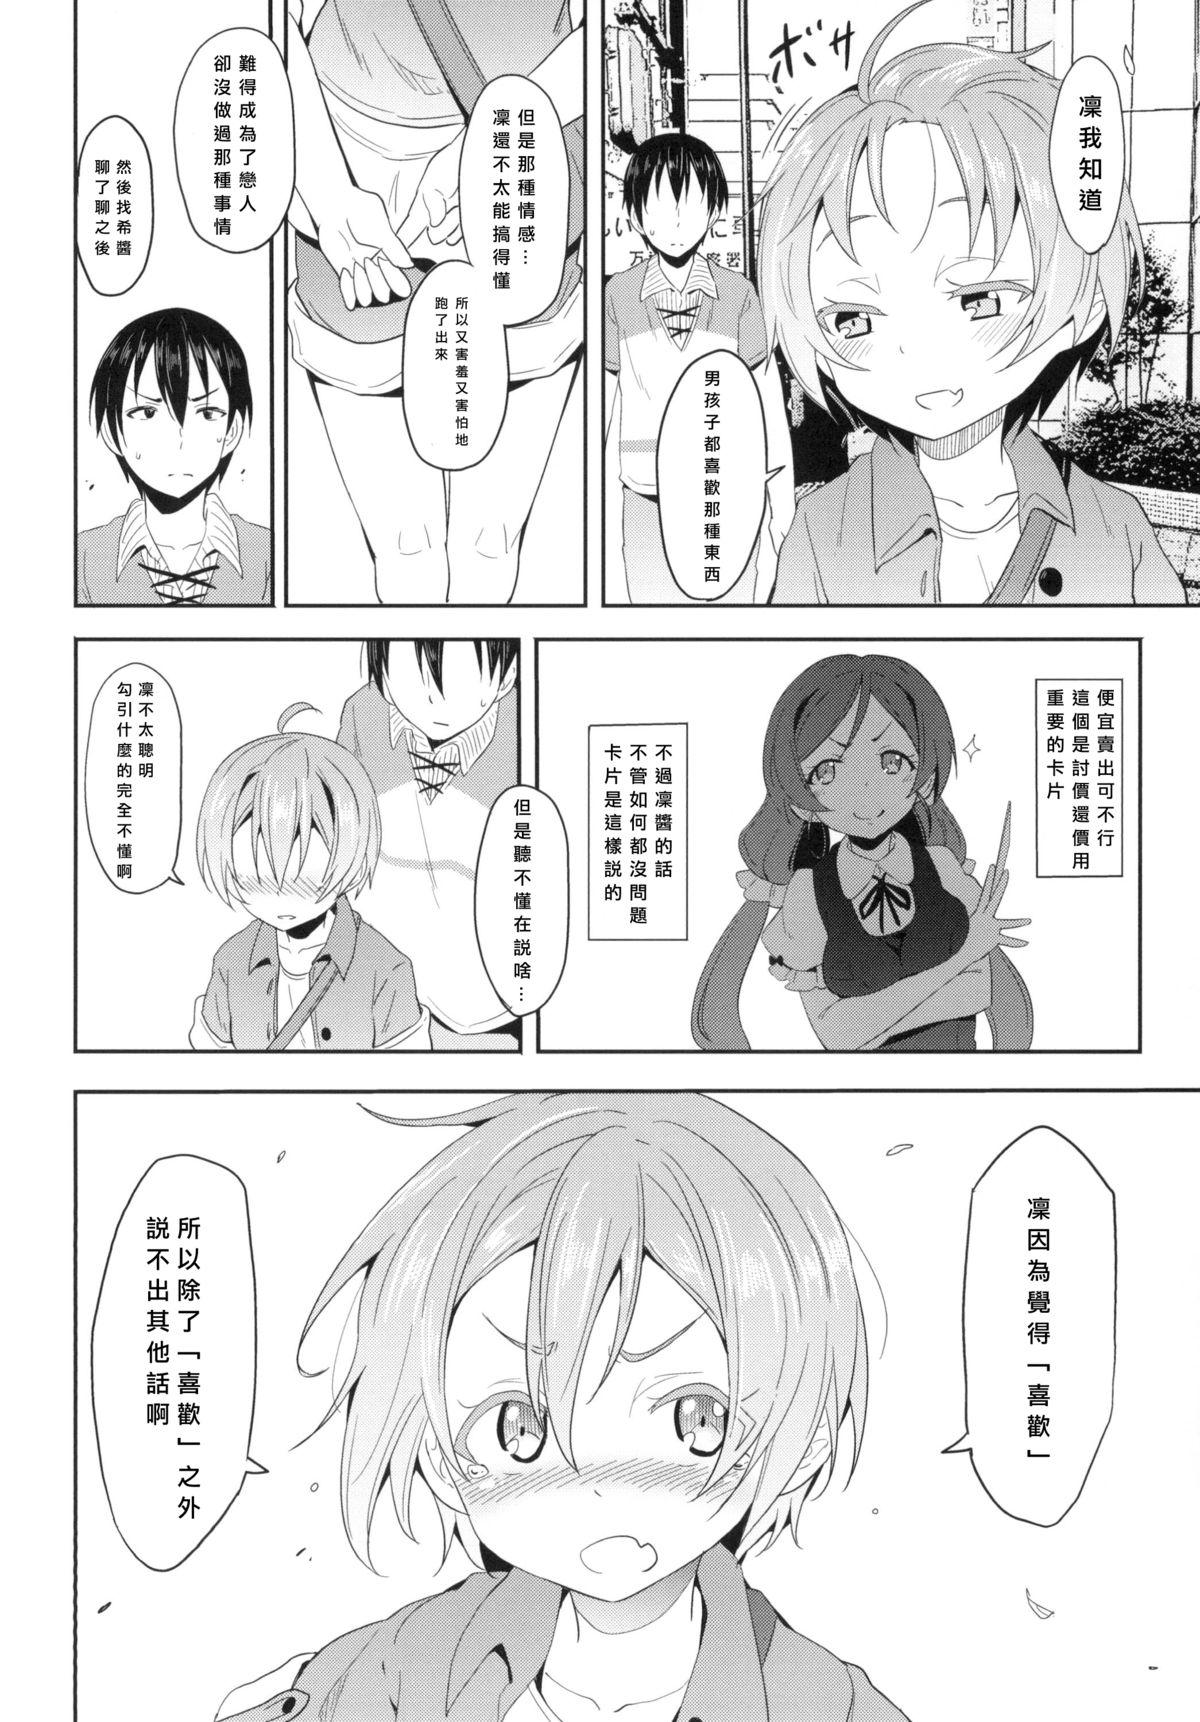 Twinks Rin-chan to Issho. - Love live Slut Porn - Page 6